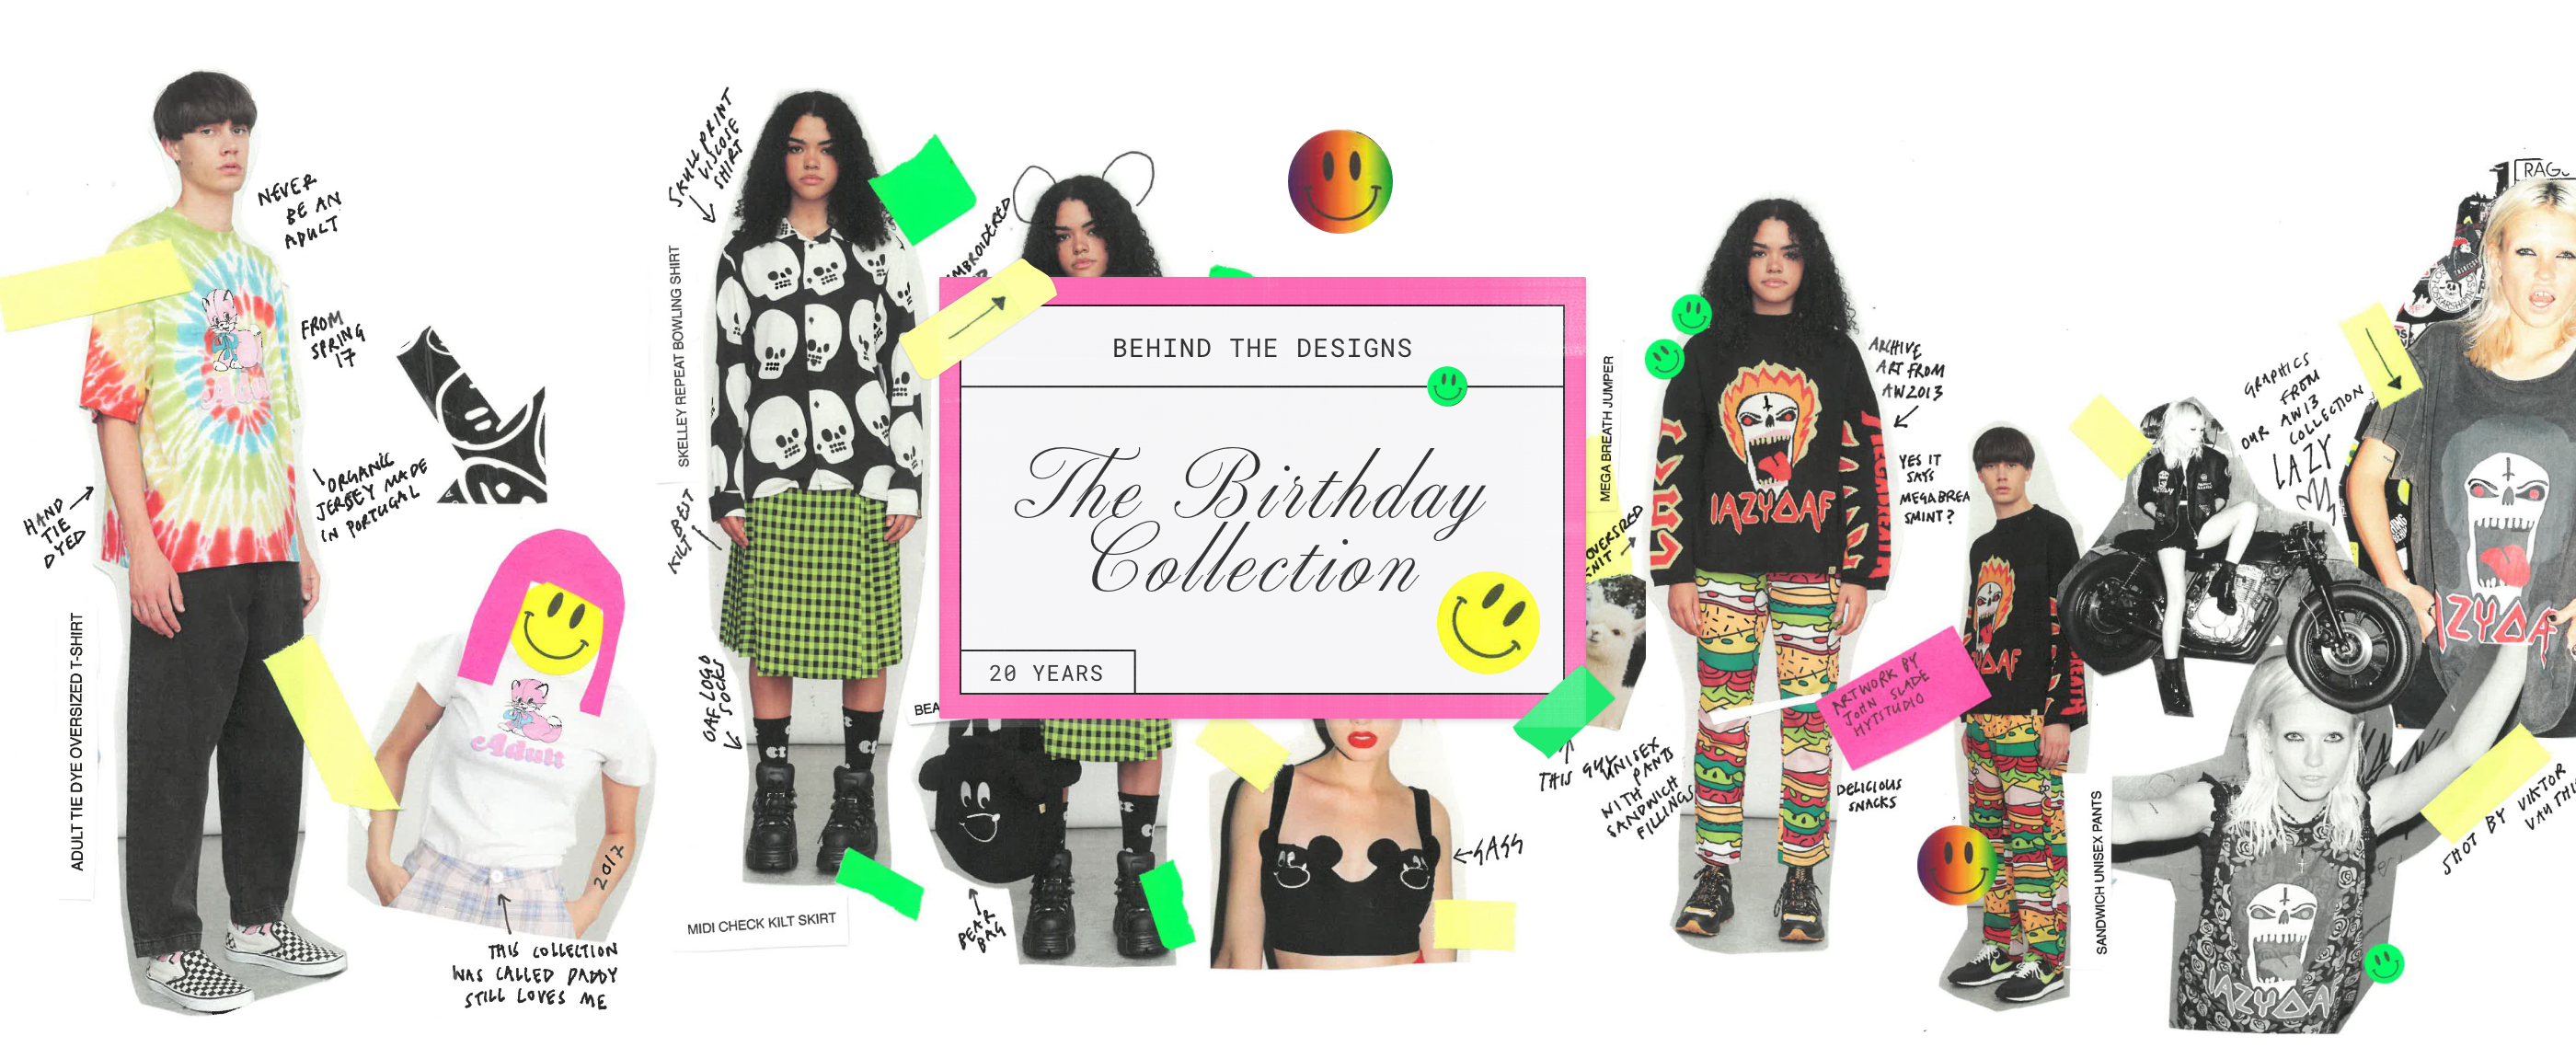 BEHIND THE DESIGNS - The Birthday Collection